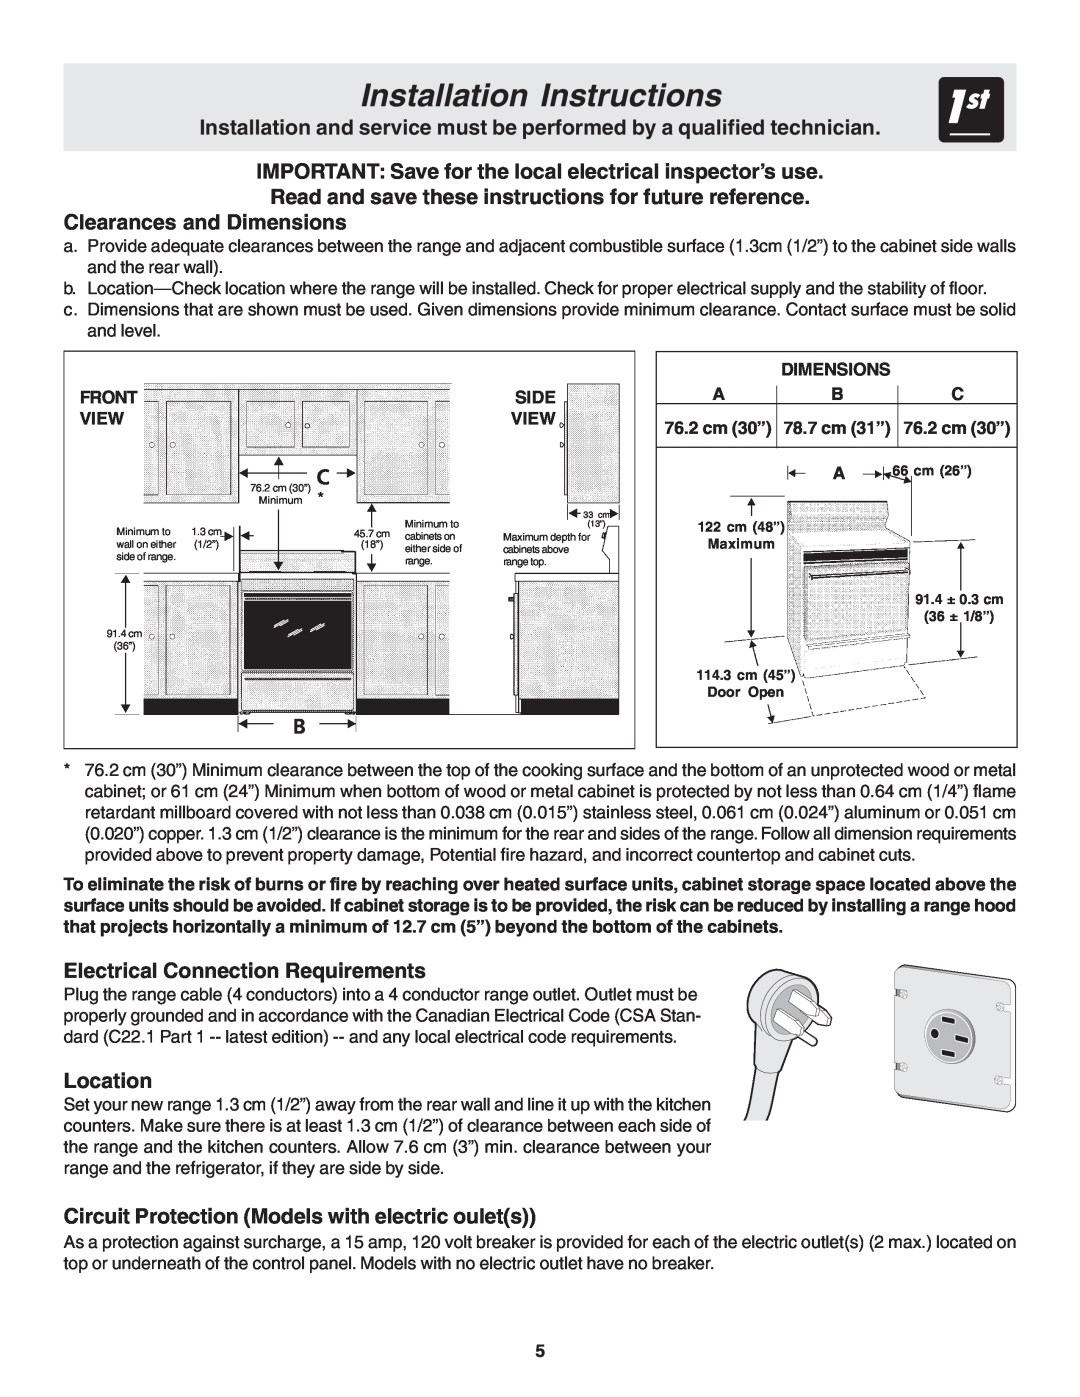 Frigidaire 318200439 Installation Instructions, Installation and service must be performed by a qualified technician, Side 